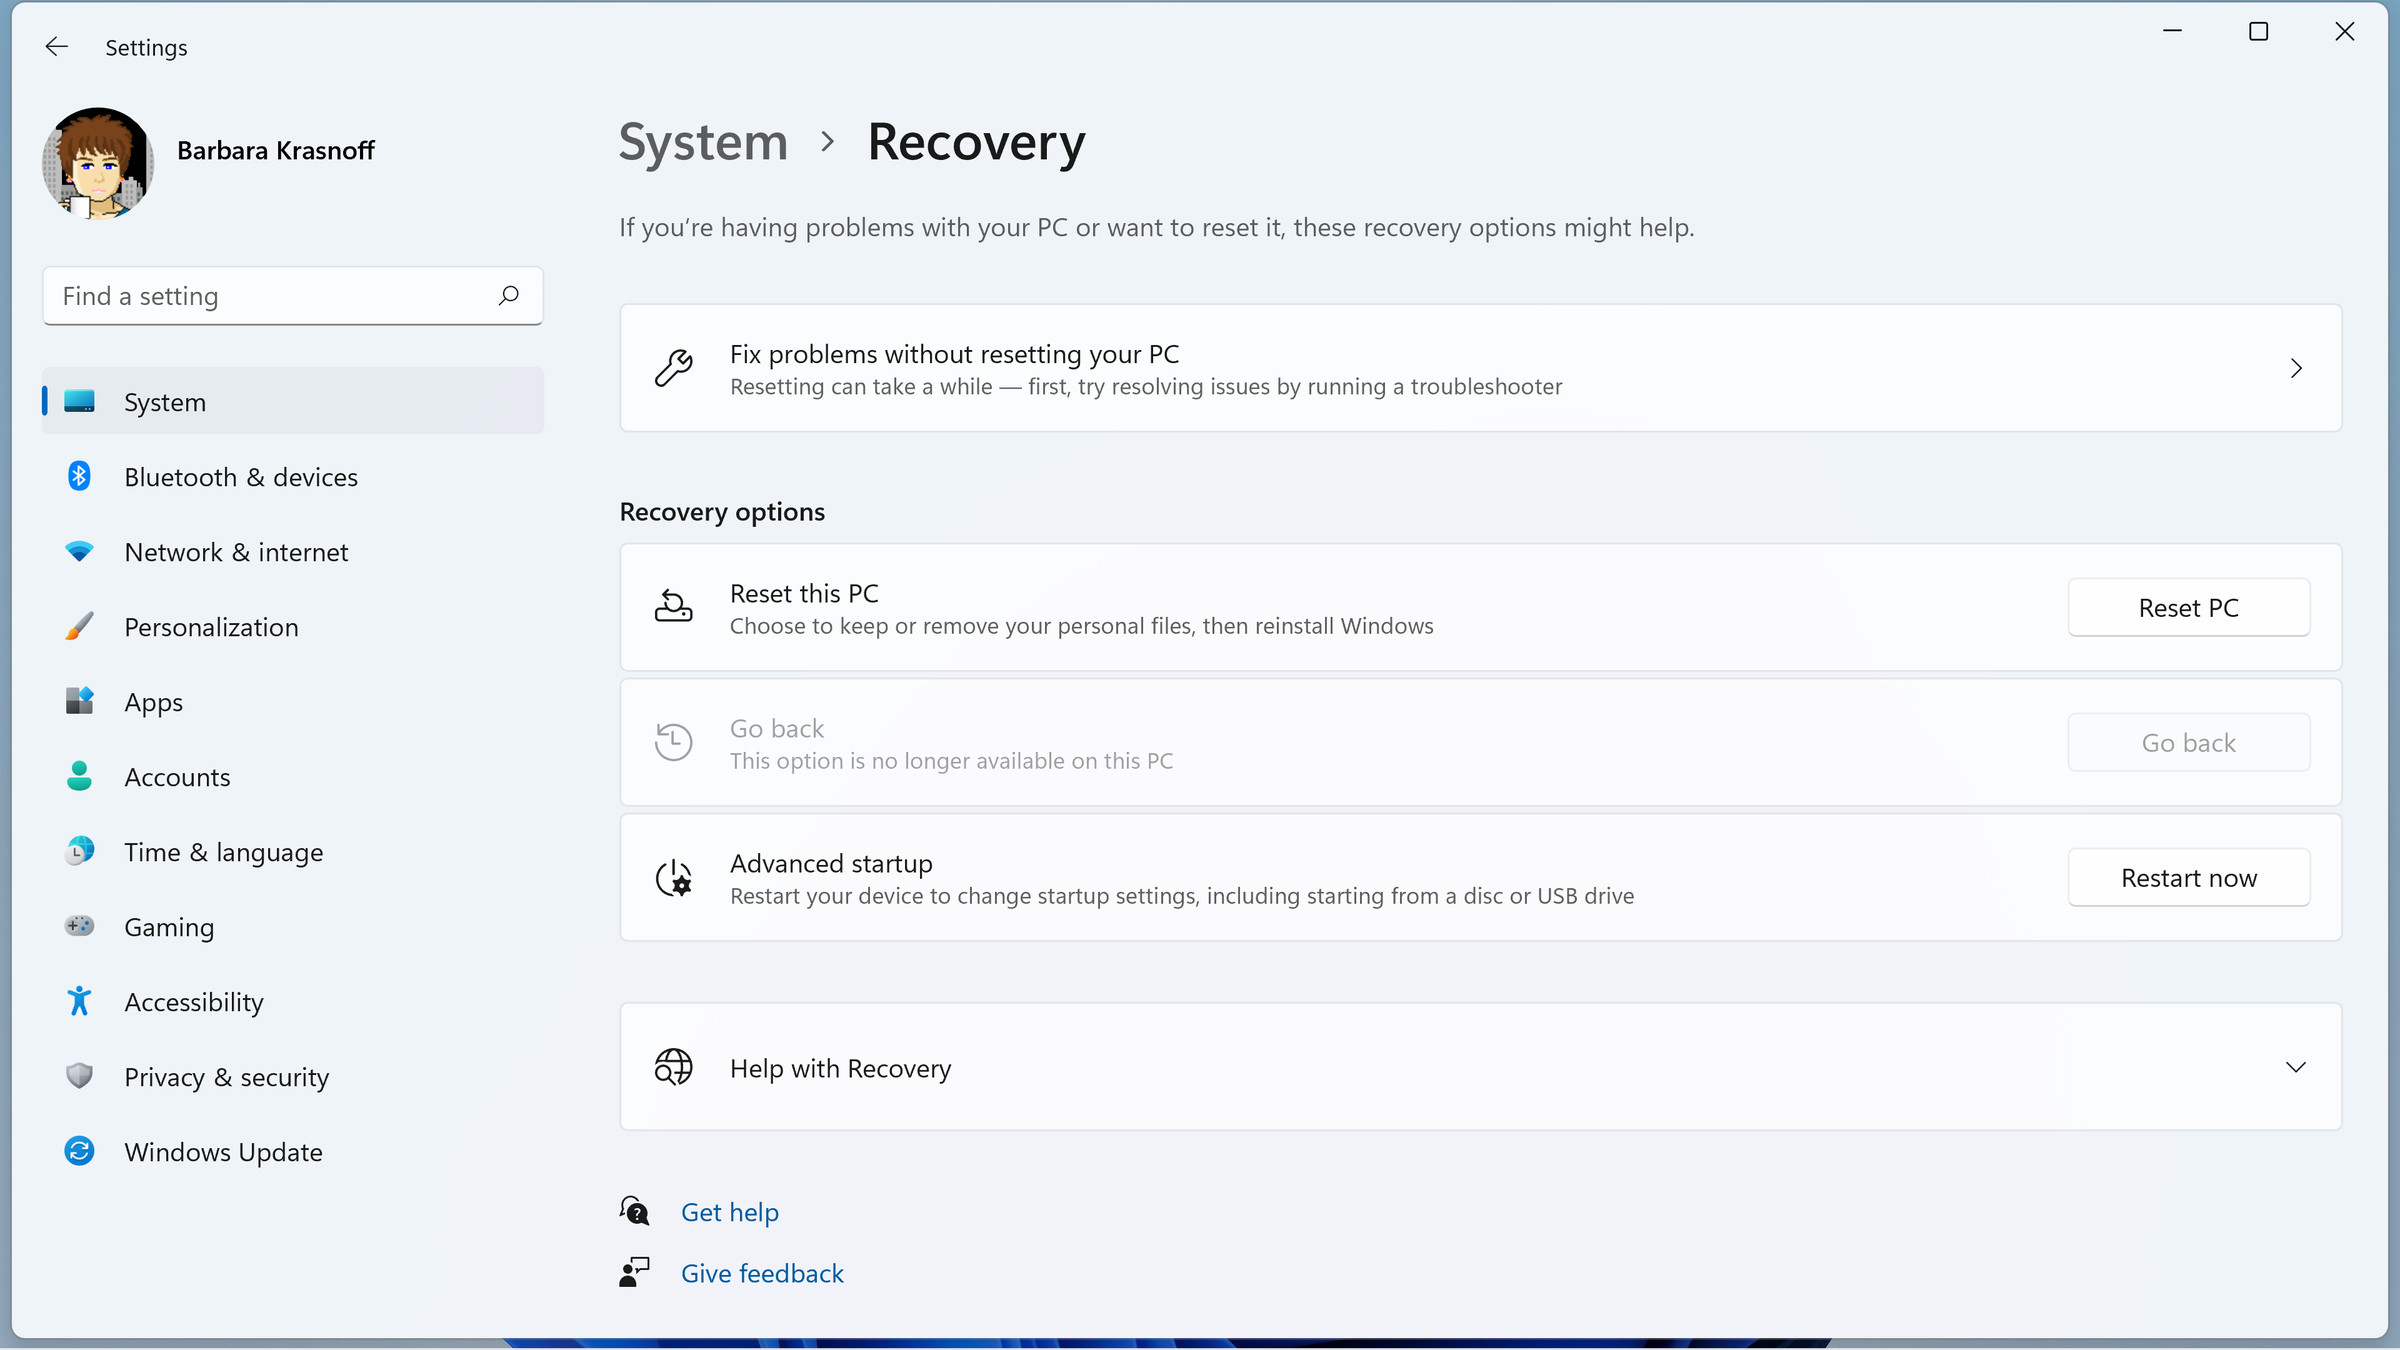 The Recovery screen lets you easily reset your PC.